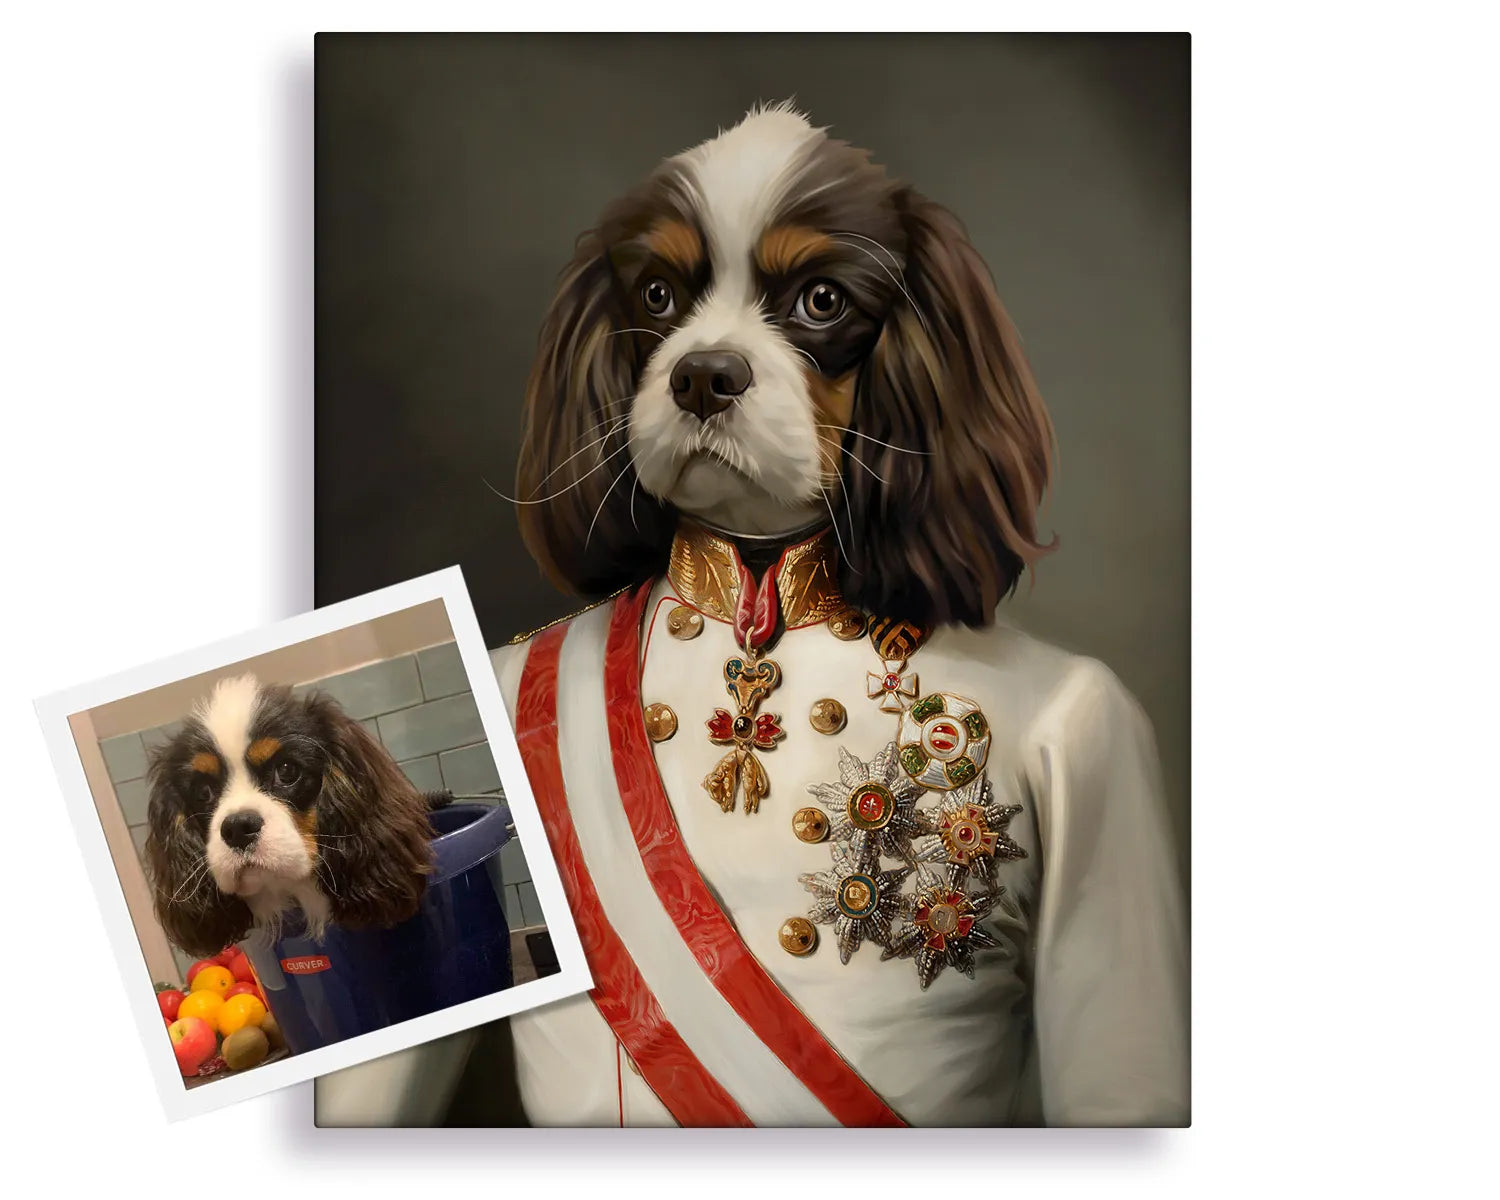 A renaissance pet portrait painting, custom-made from a image and a historical costume